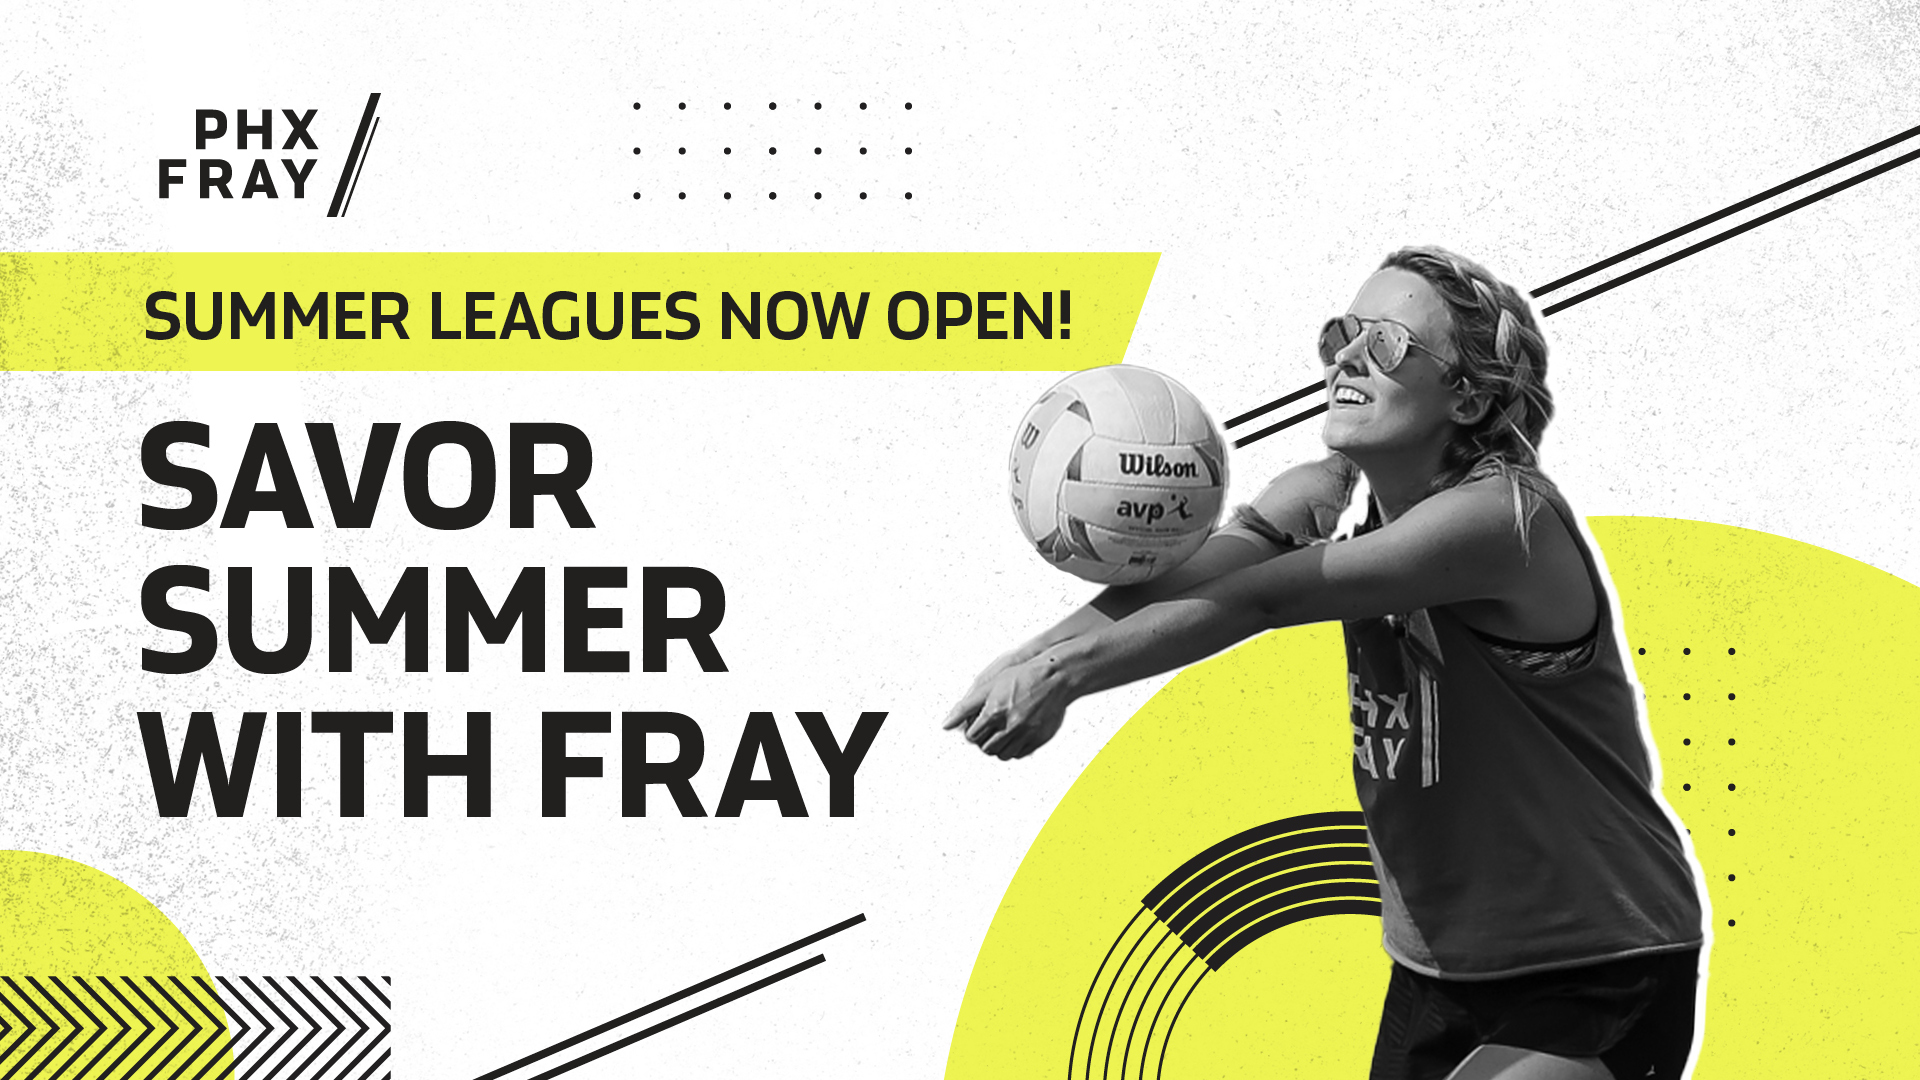 Last Day to save on PHX Fray Social Sport Leagues, Scottsdale, Arizona, United States